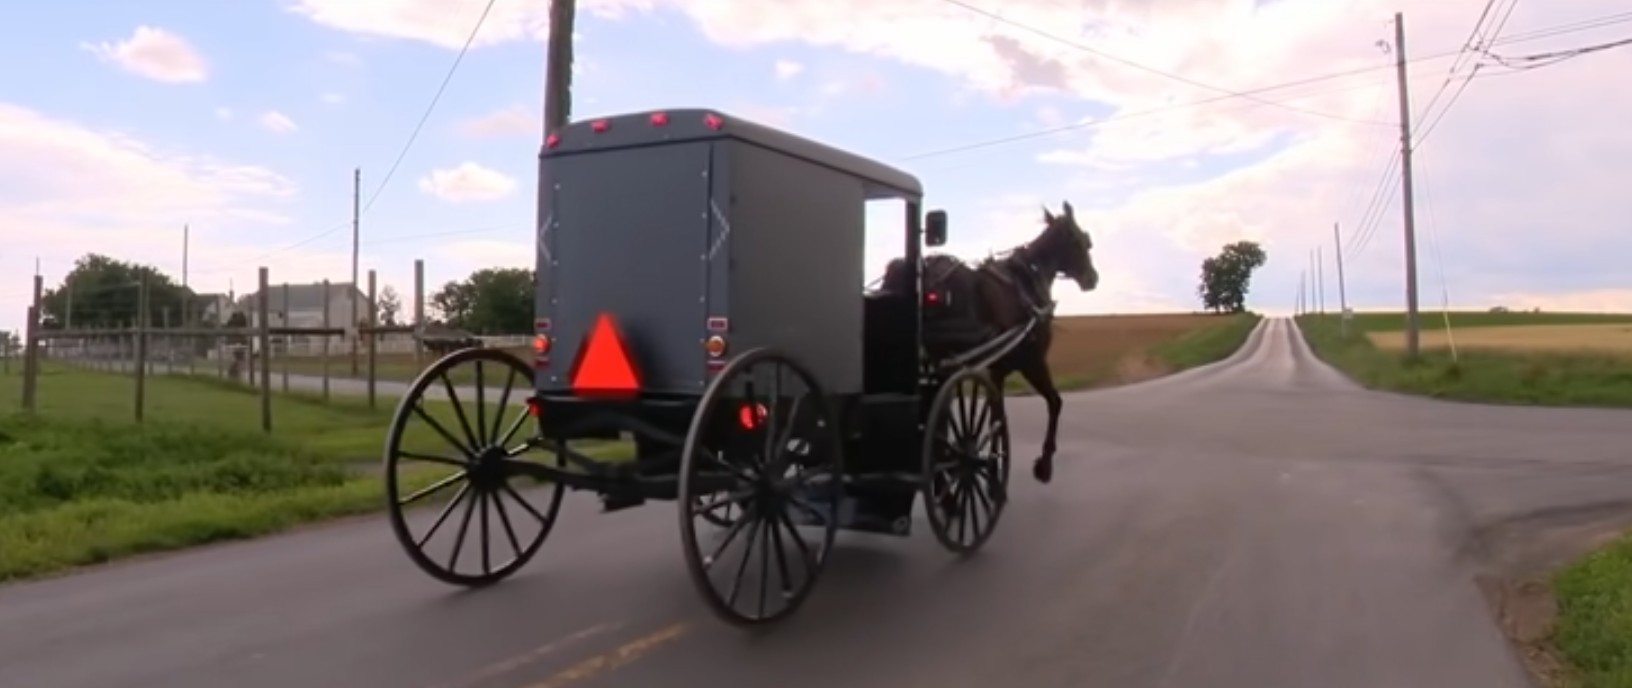 Amish horse carriage